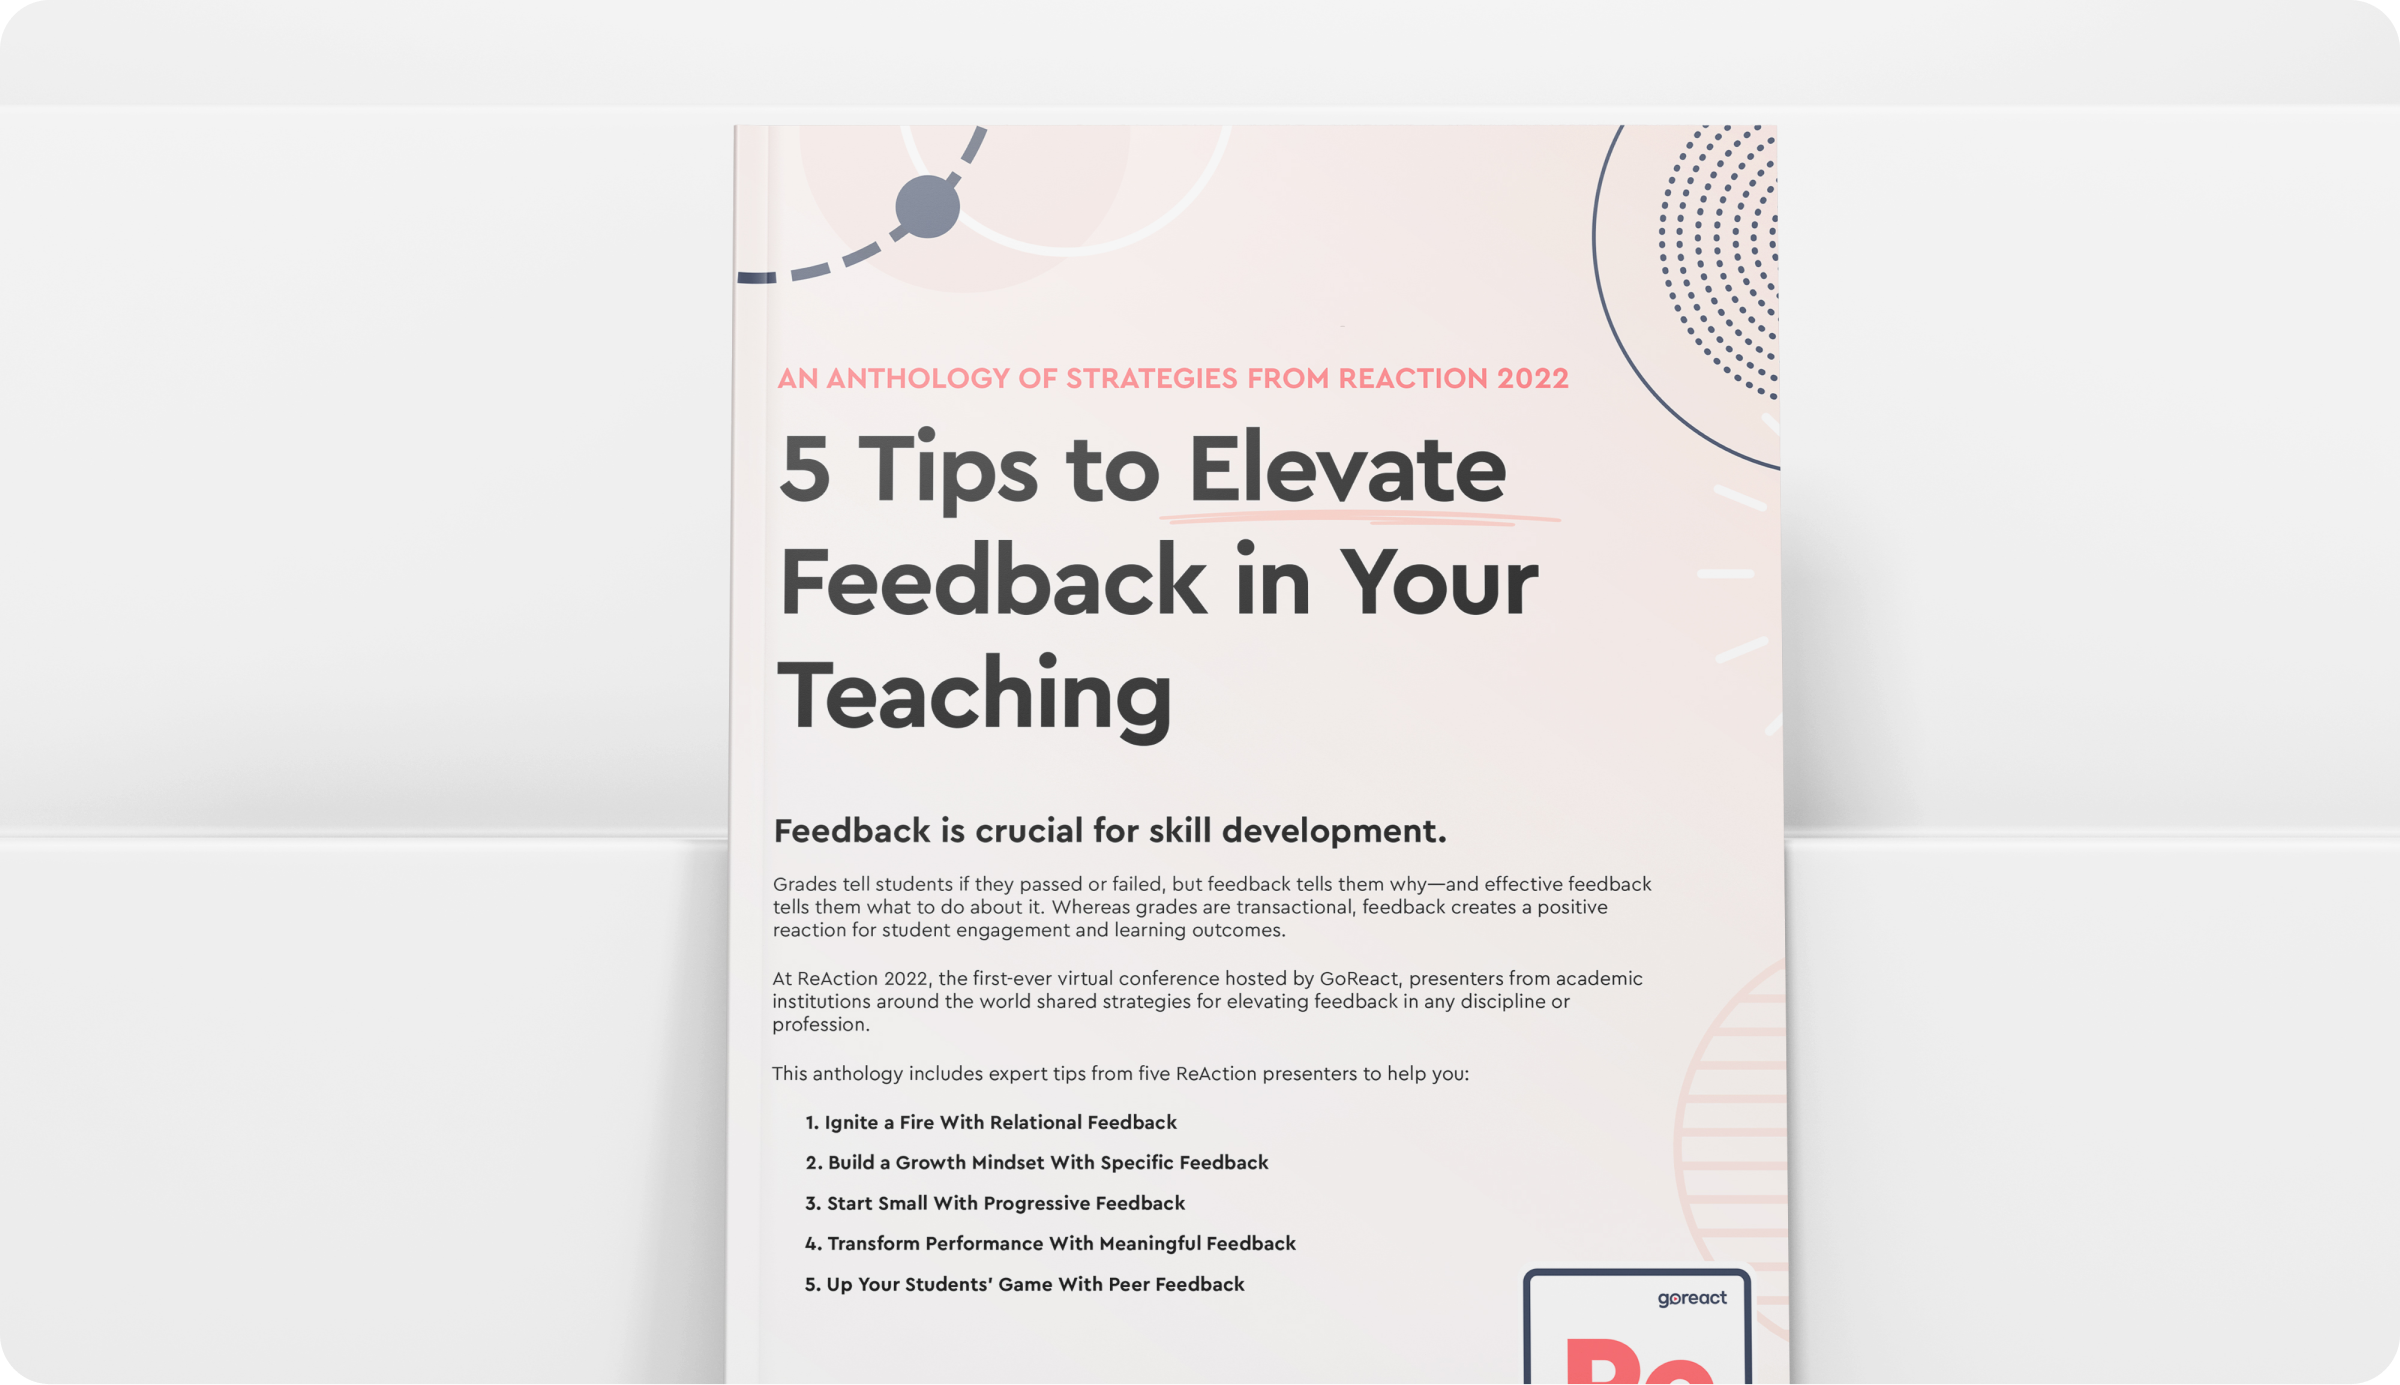 5 Tips to Elevate Feedback in Your Teaching